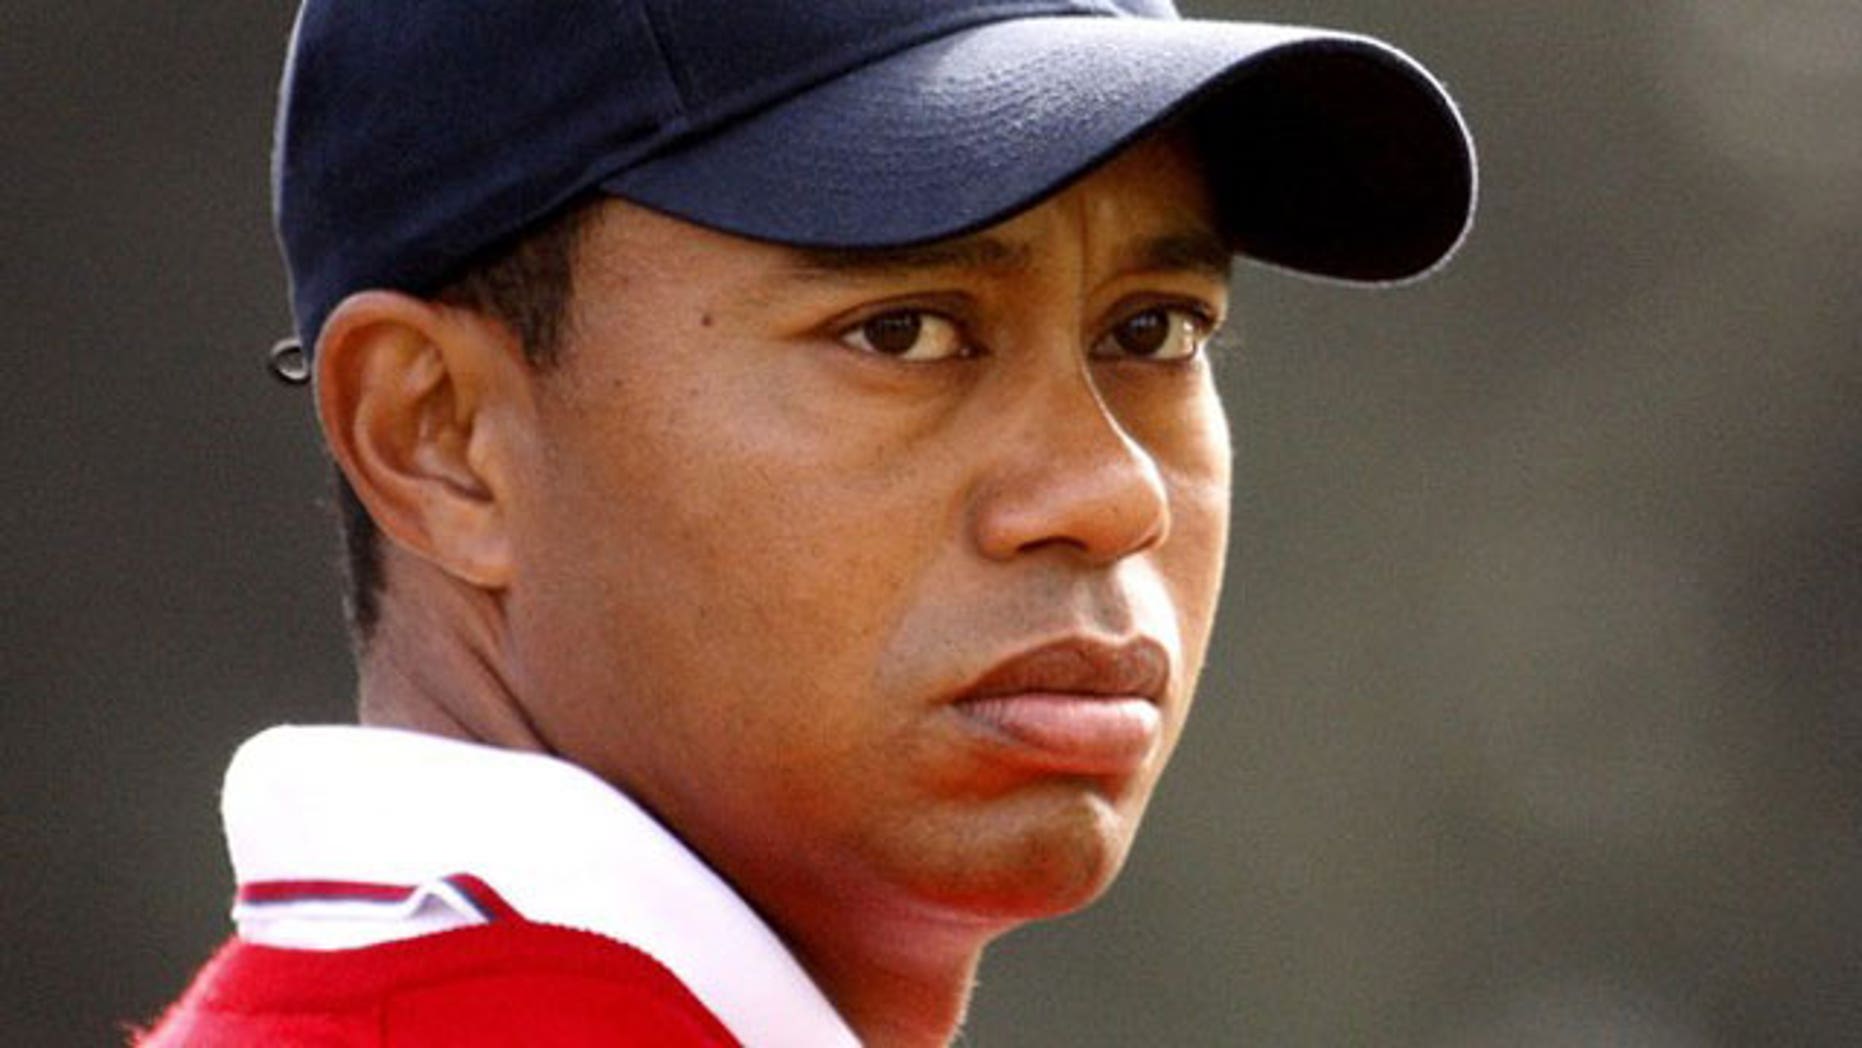 Impregnated Porn - Report: Tiger Woods Impregnated Porn Star Girlfriend Twice ...